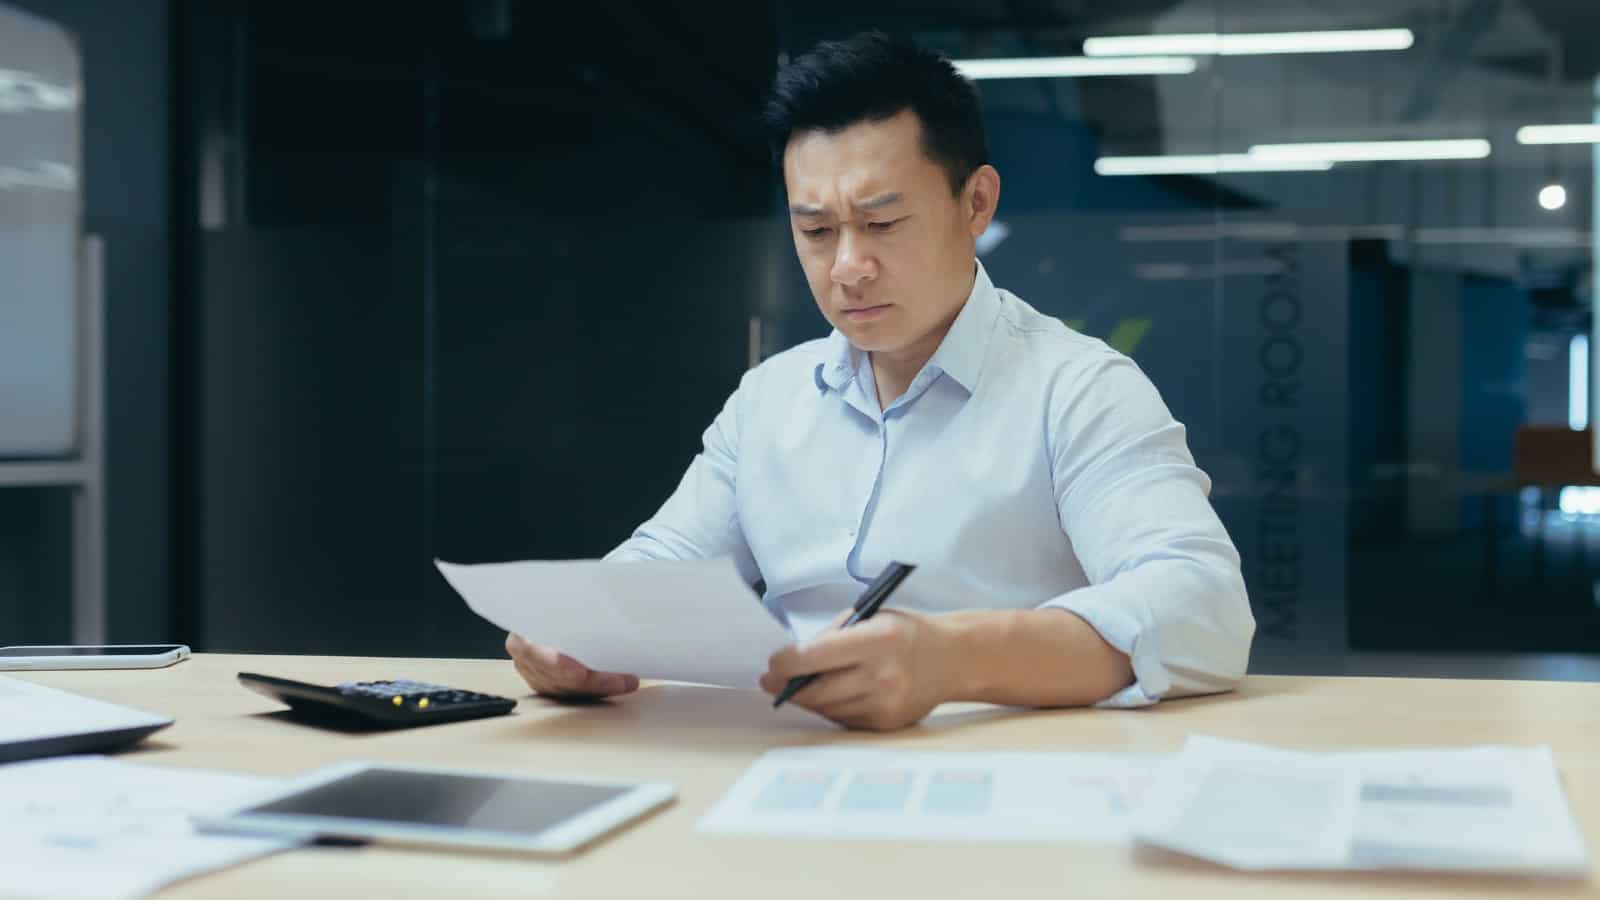 Asian man looking concerned while studying paperwork at his desk in an office